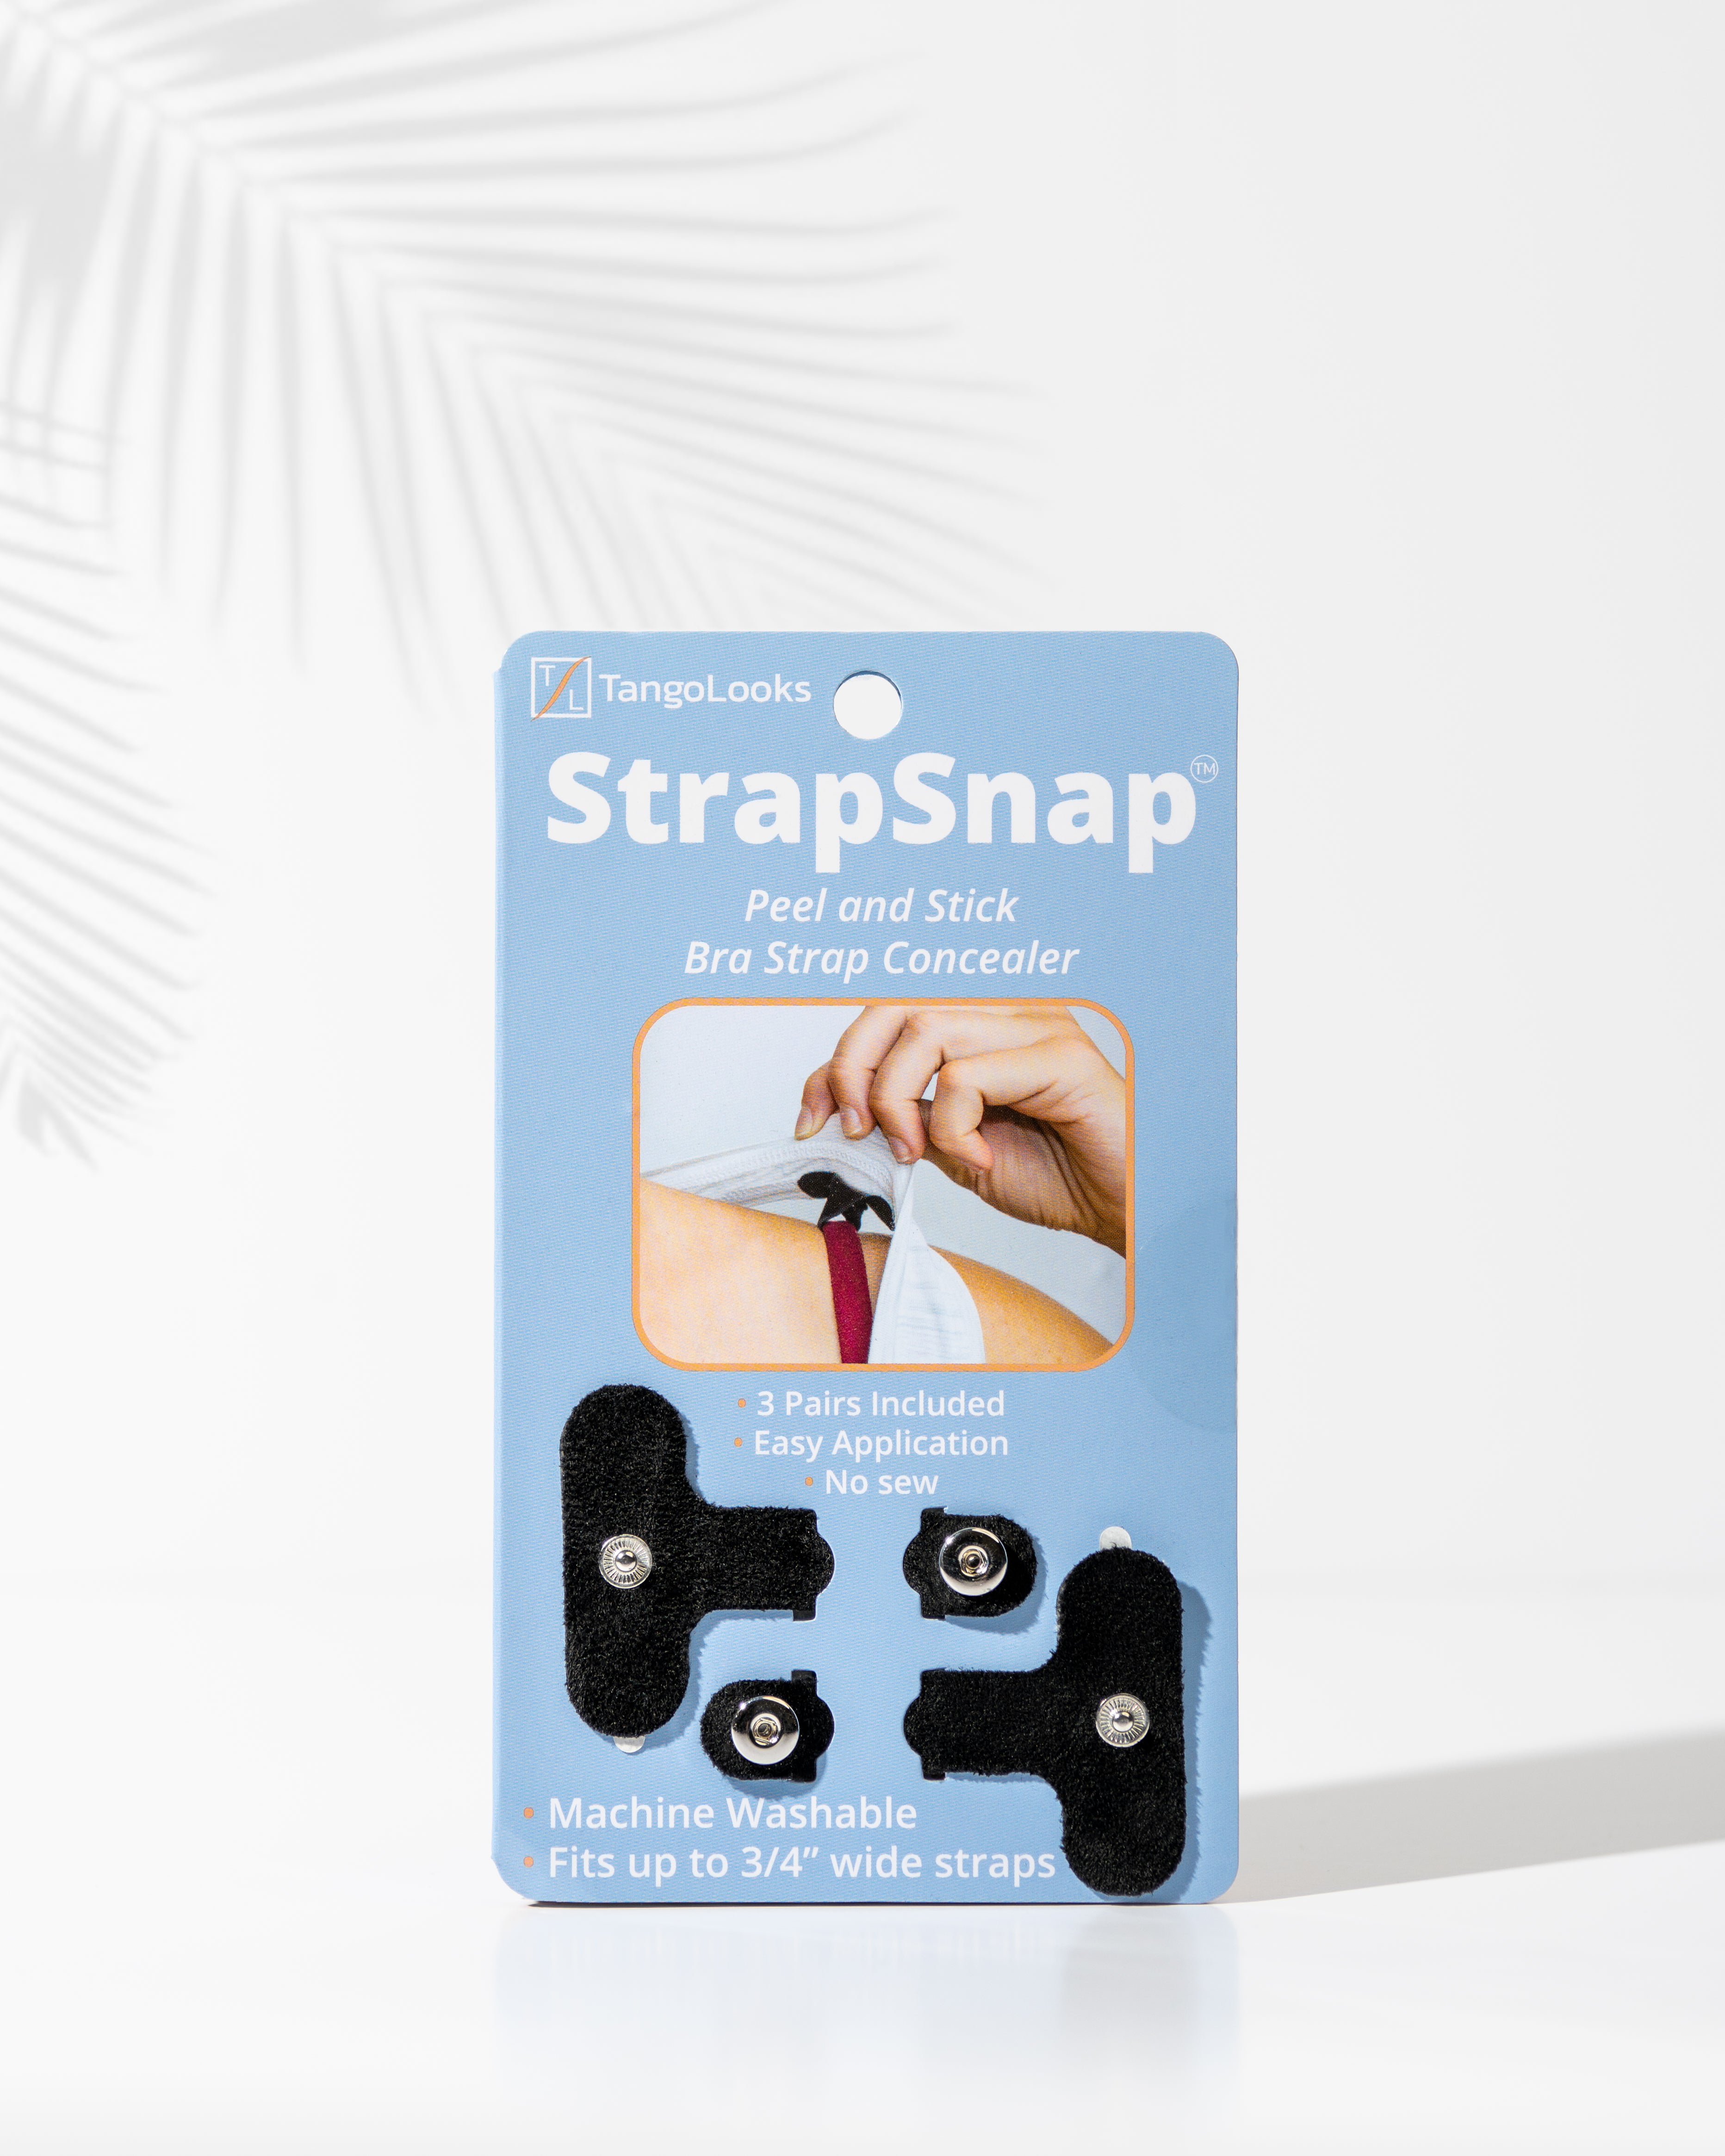 TangoLooks, Makers of The StrapSnap Bra strap Concealer – tangolooks